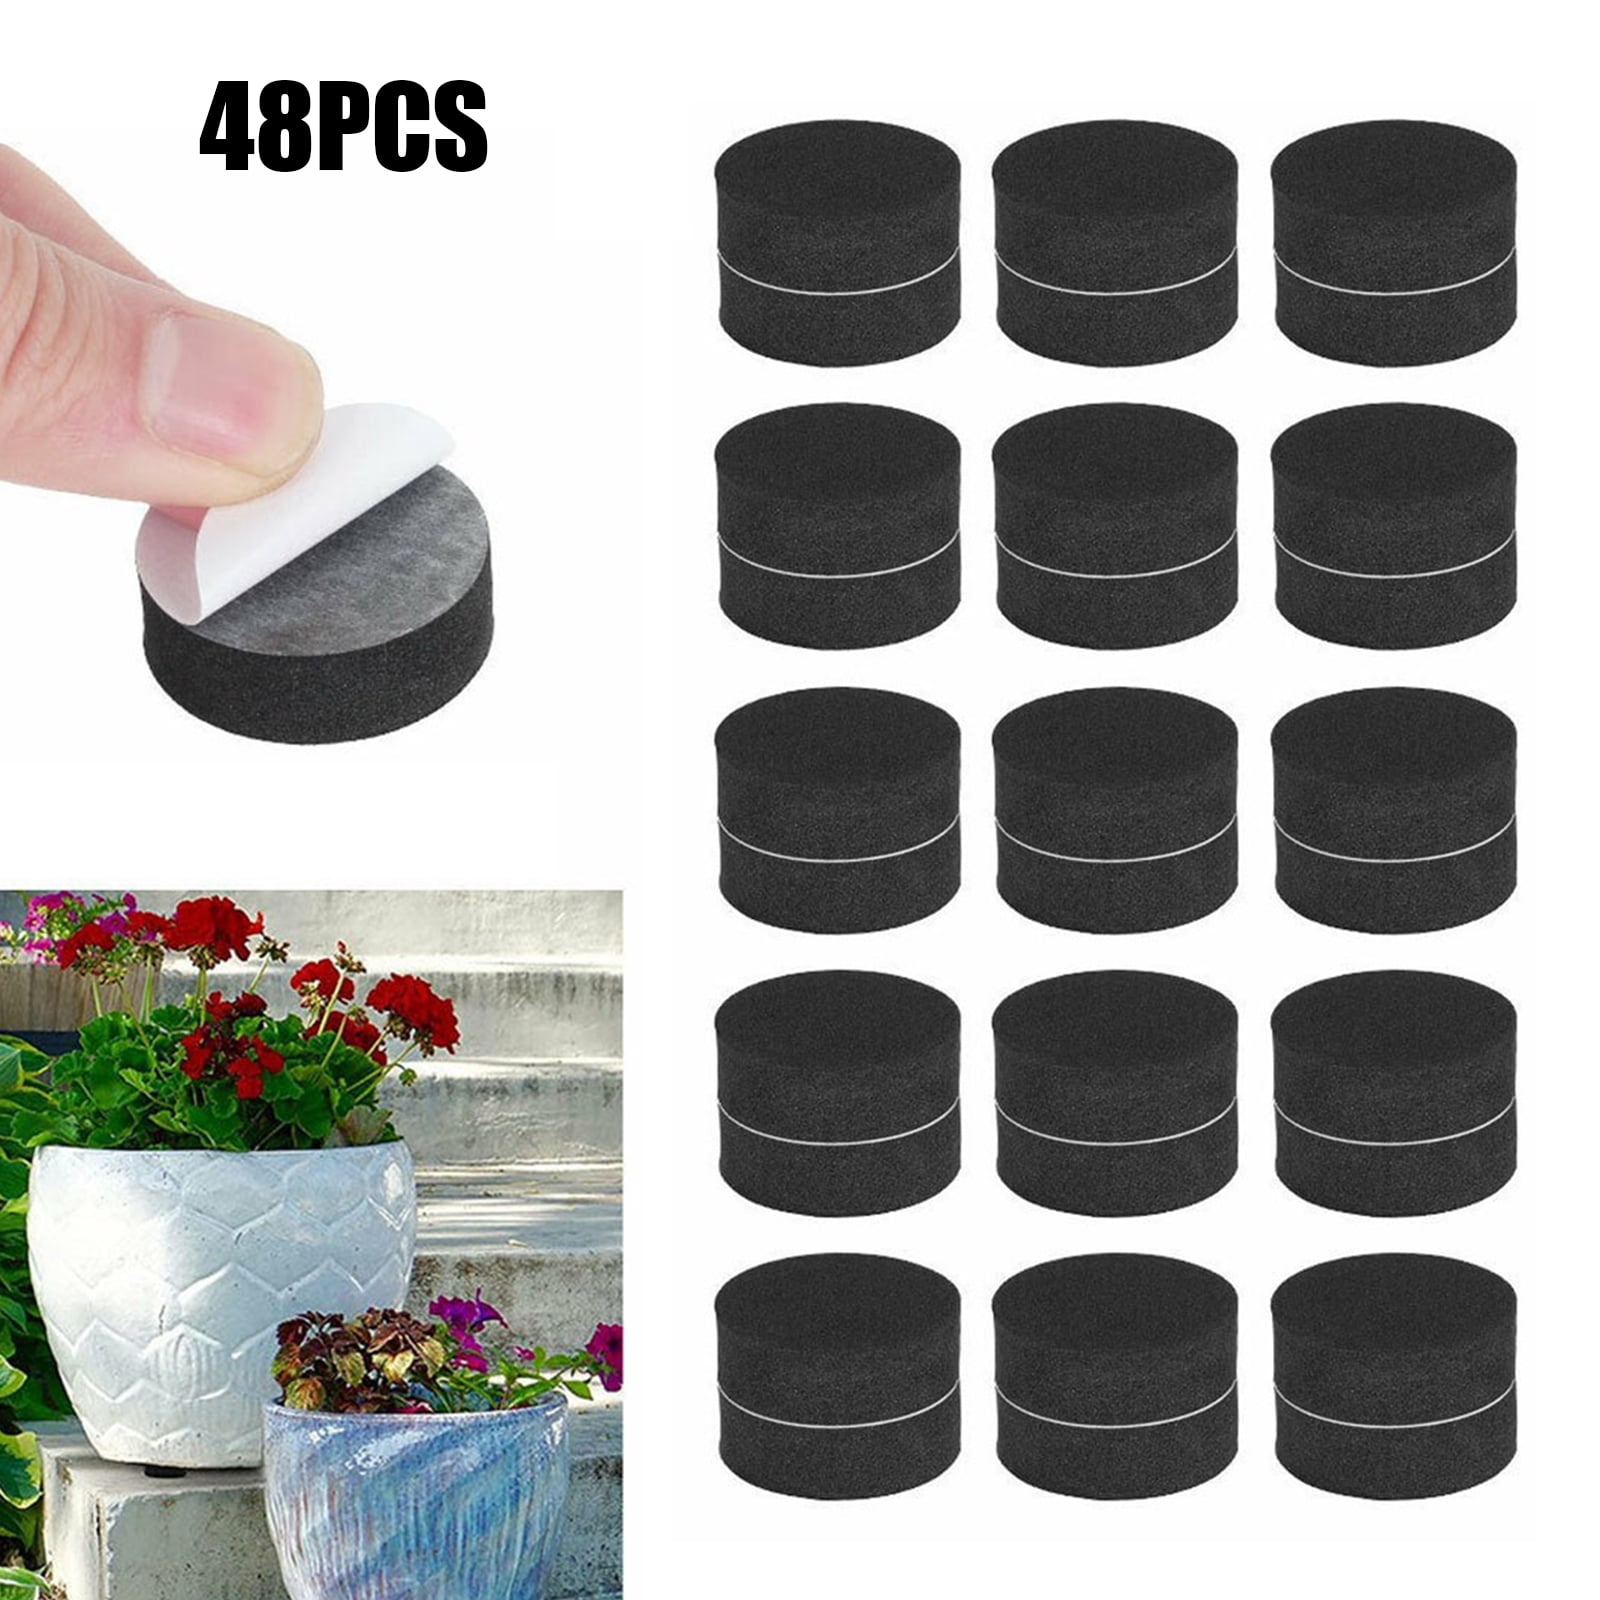 Invisible Plant Pot Feet,48 Pack Black Flower Pot Risers,Non-Slip with ...